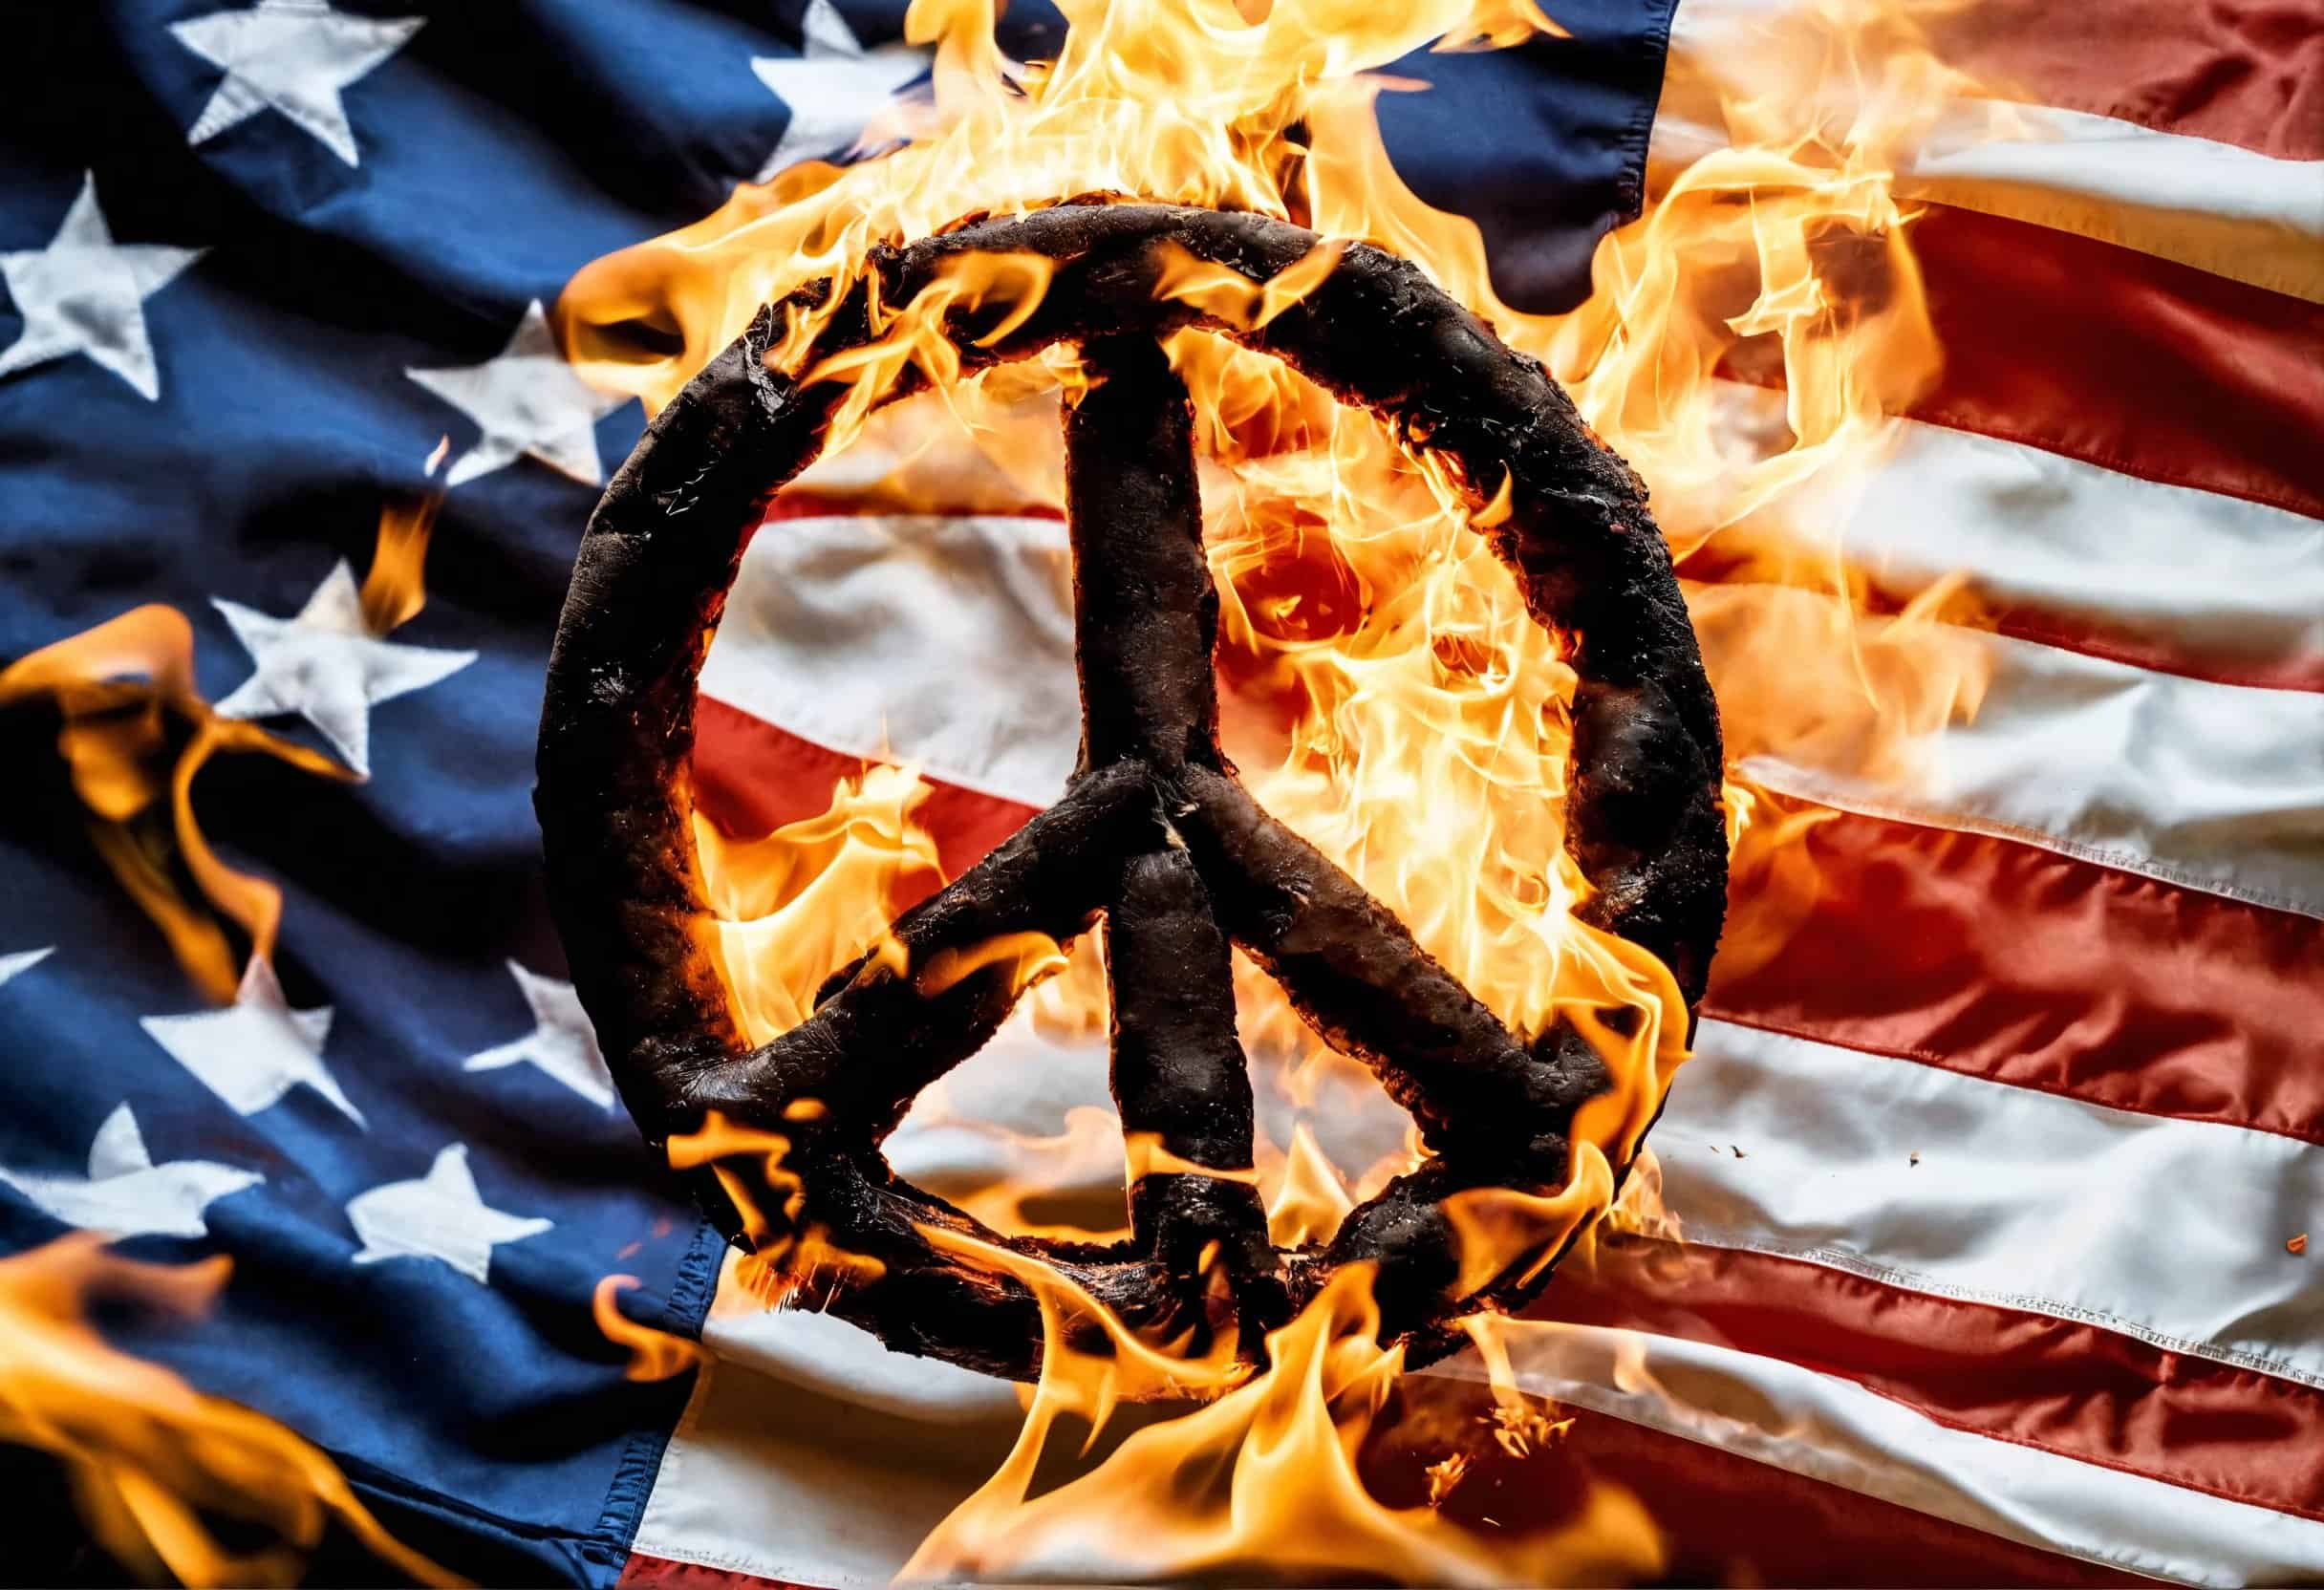 Burning peace sign on an American flag